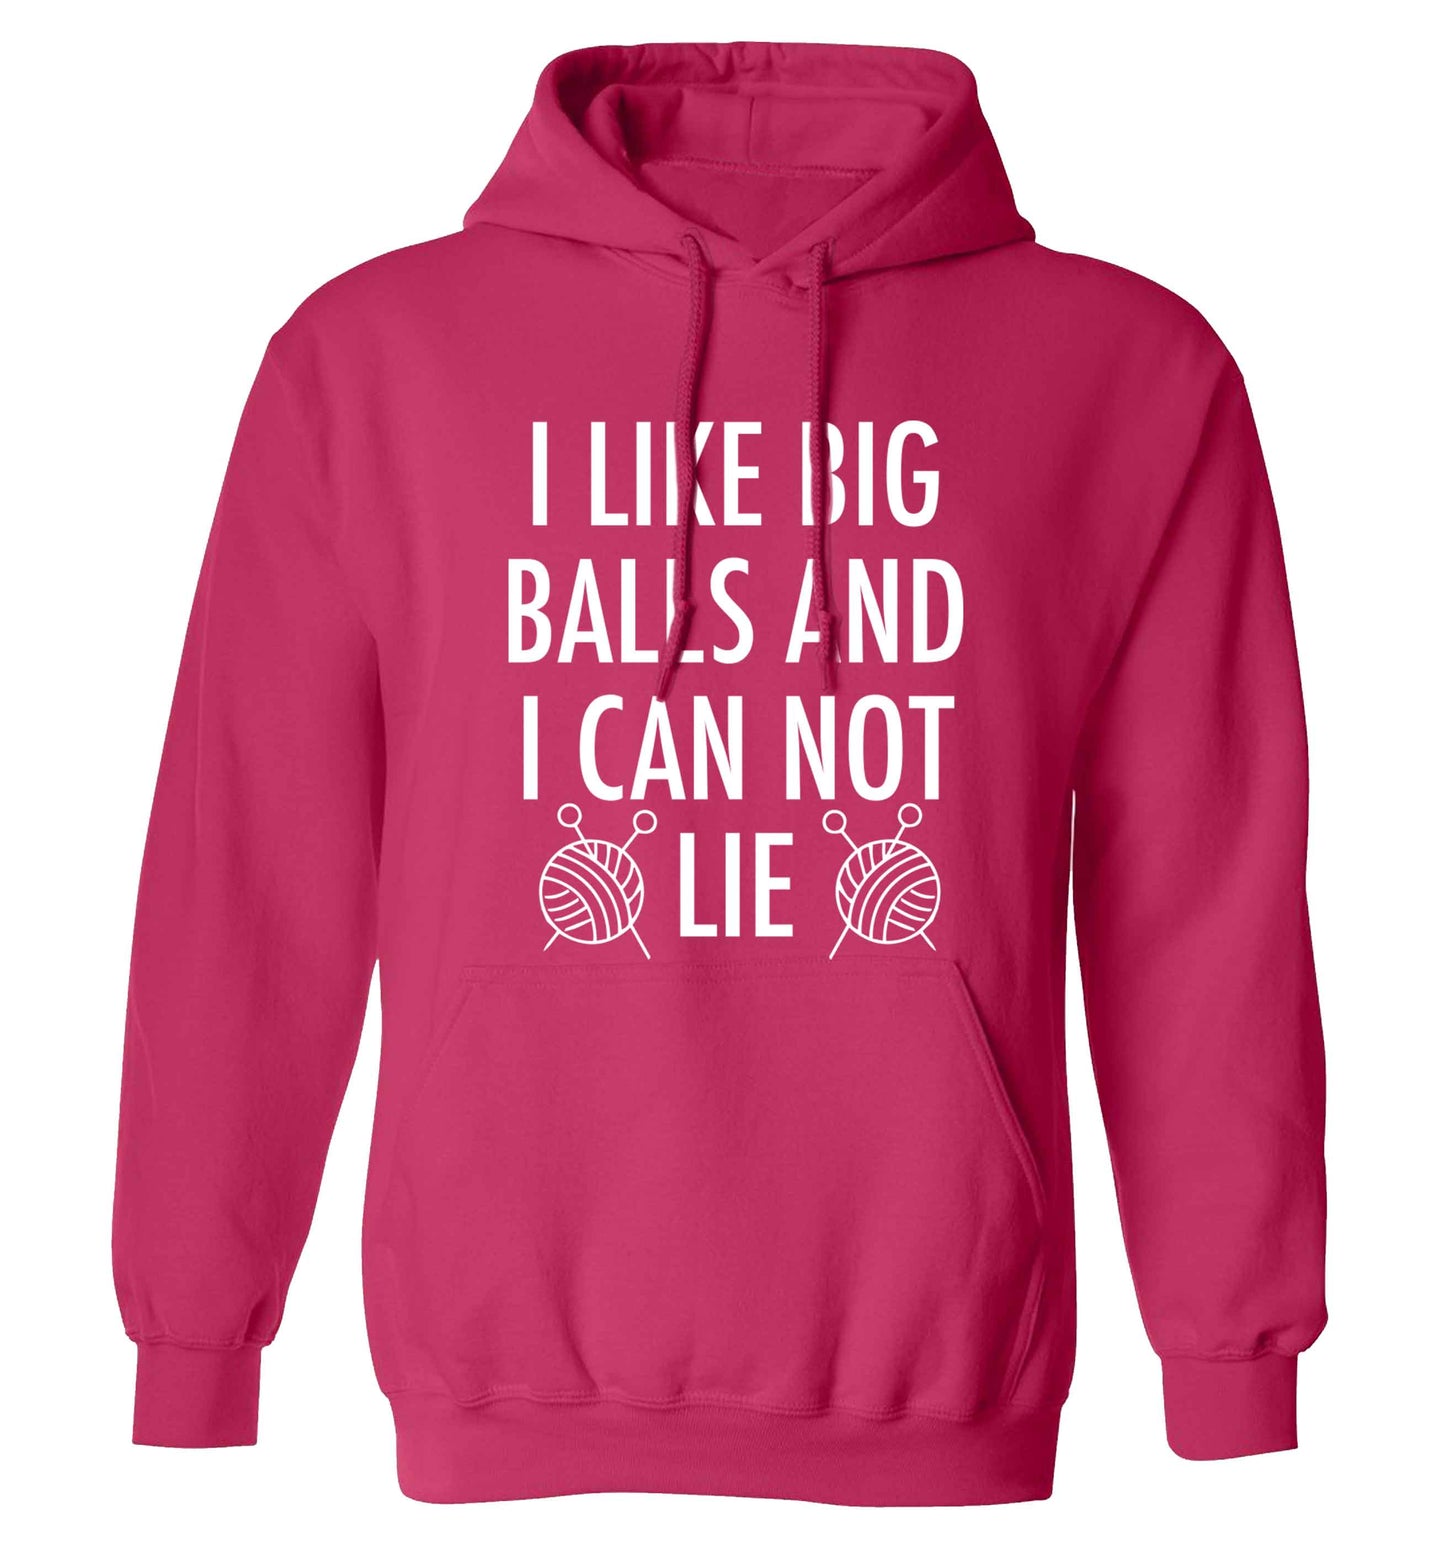 I like big balls and I can not lie adults unisex pink hoodie 2XL